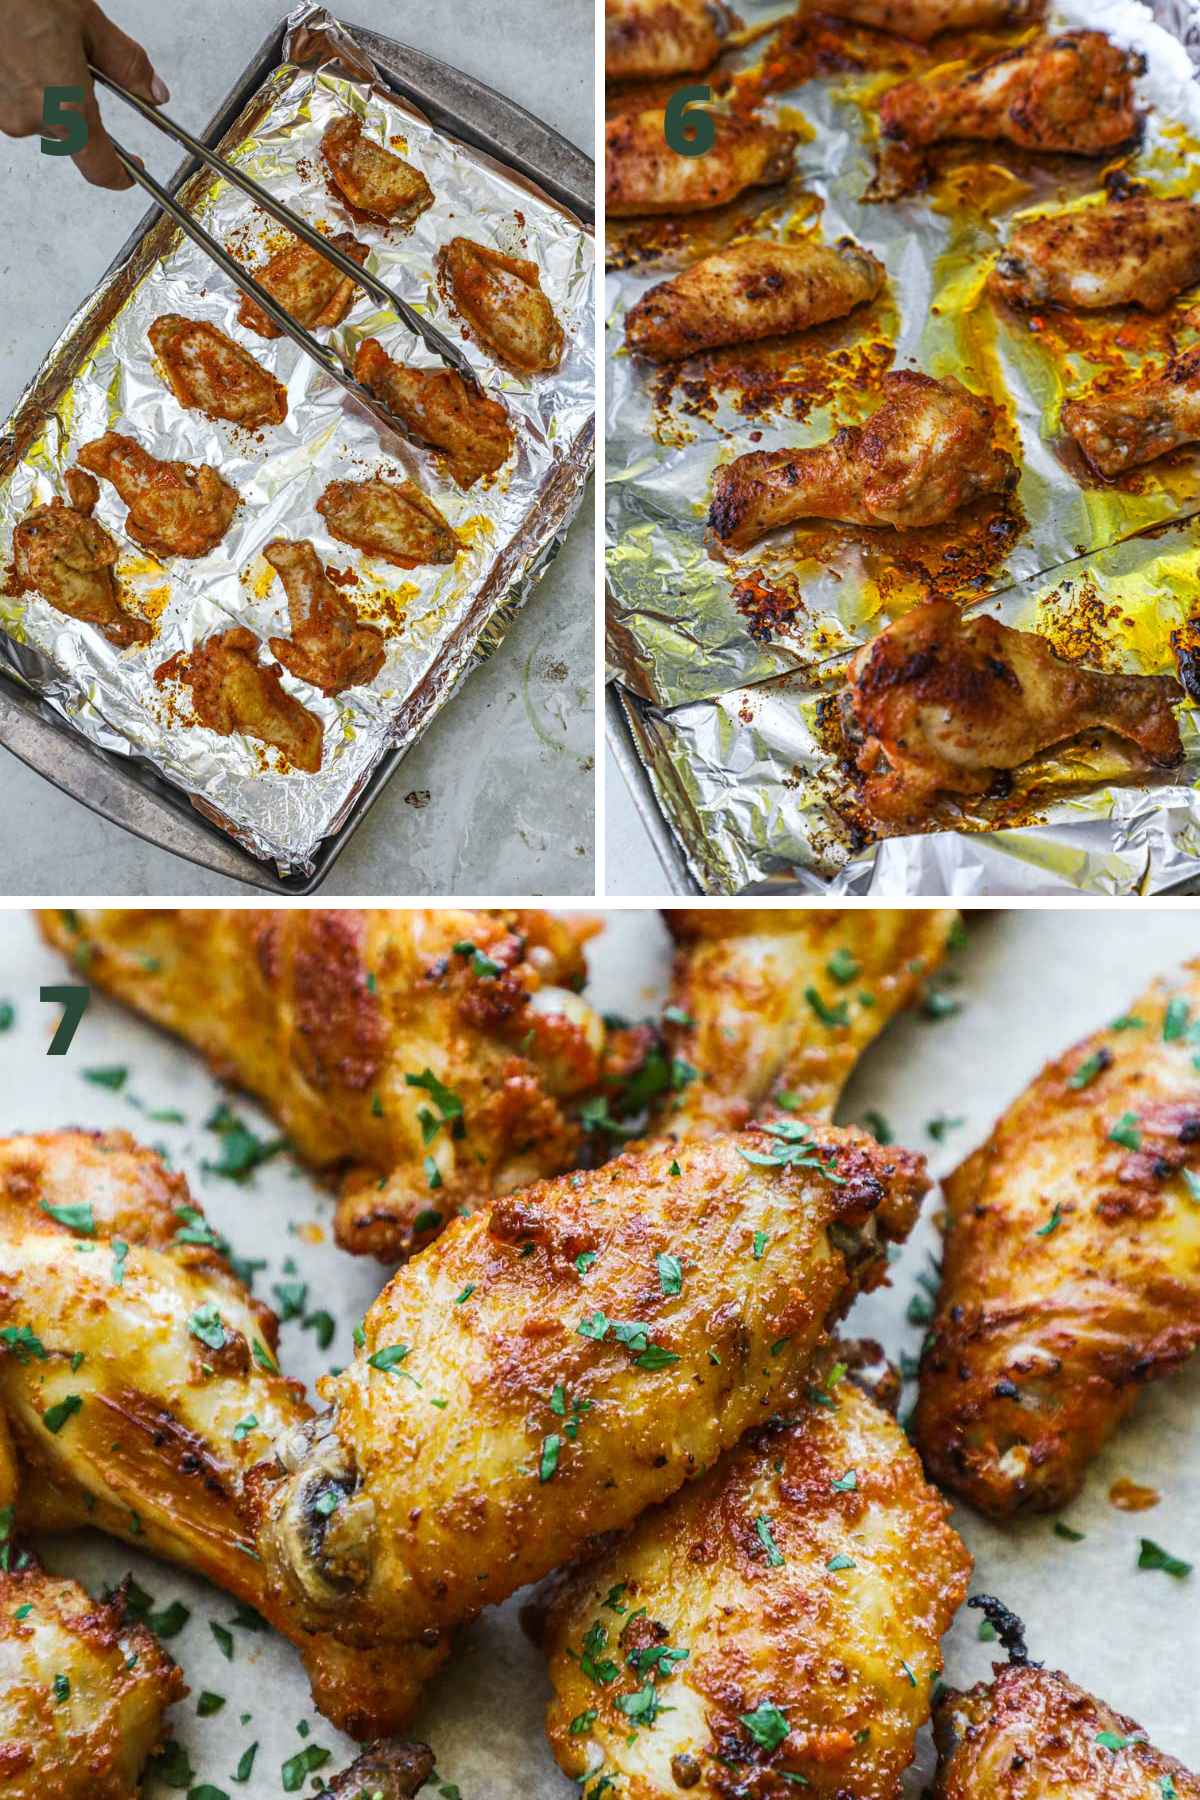 Steps to make crispy oven-baked chicken wings, turning over wings mid-bake or broil, taking out of the oven, and topping with chopped parsley.